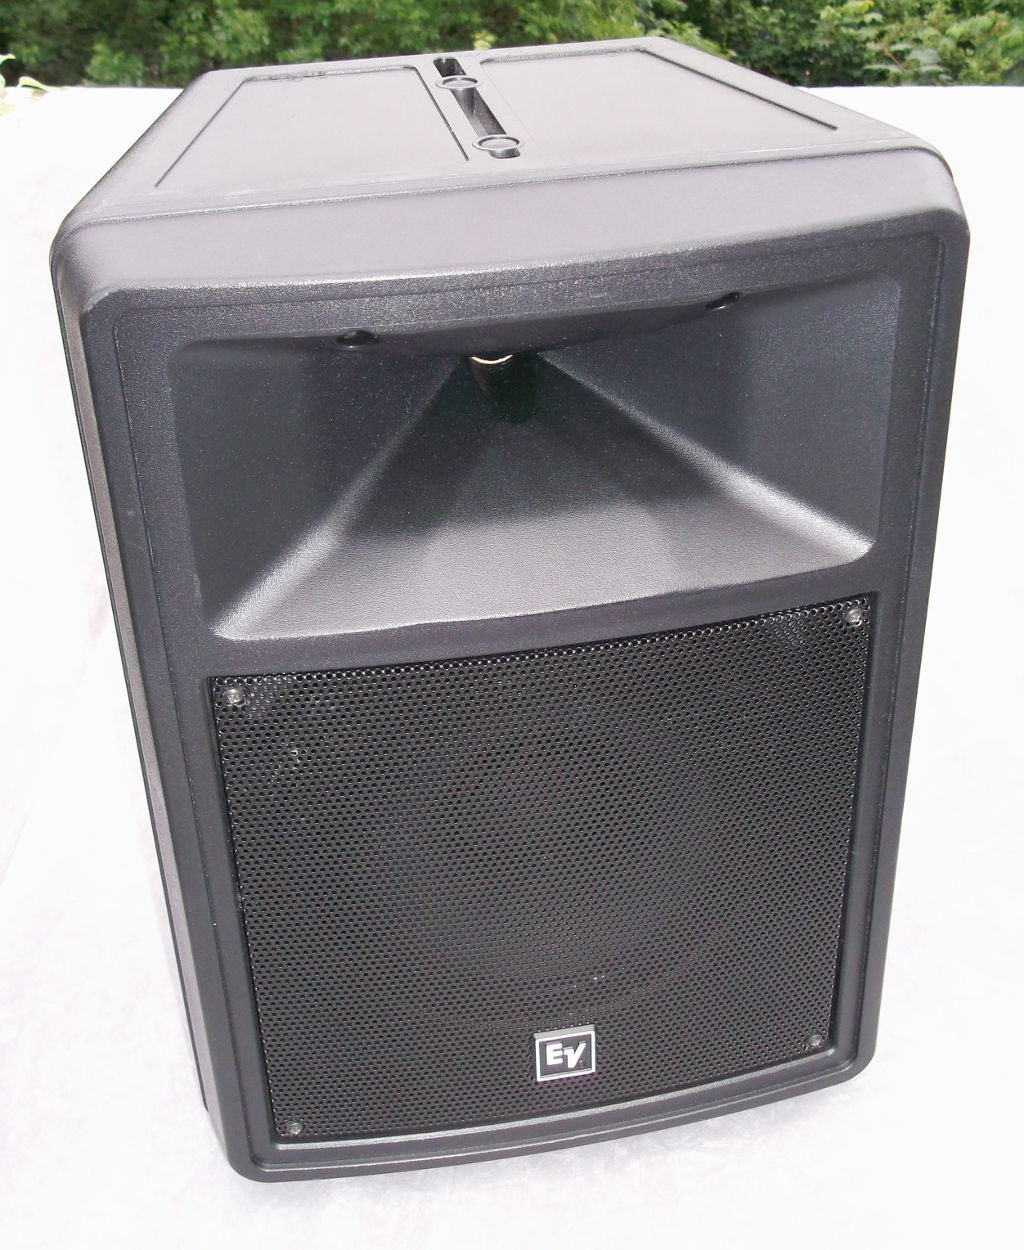 One One Two..: Sold - ElectroVoice EV Sx80 Speakers - £120